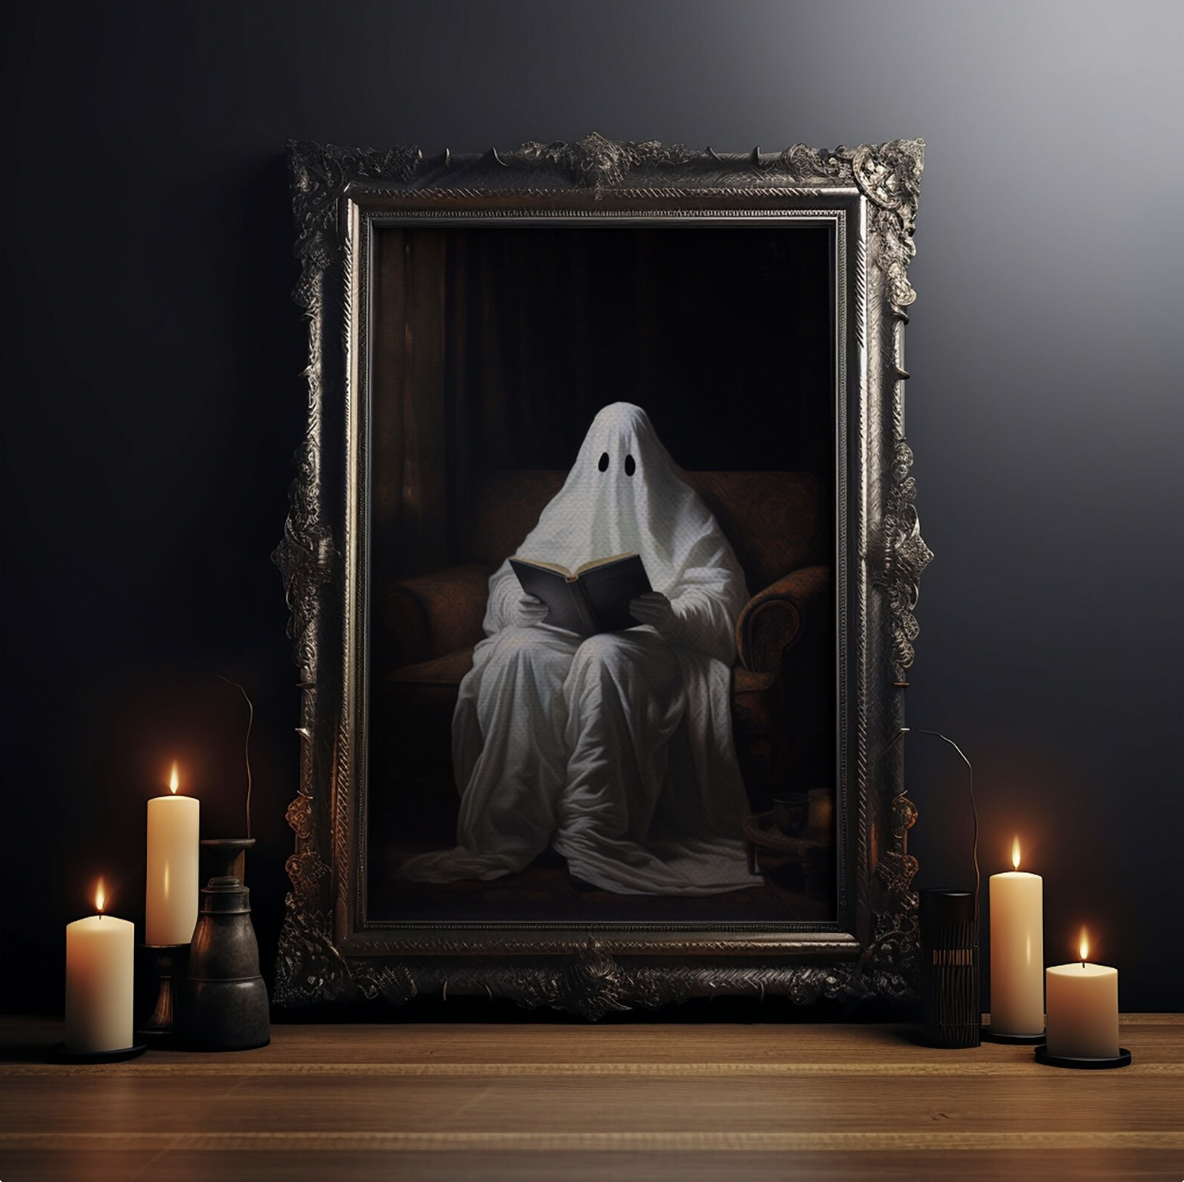 A painting of a ghost in a white sheet with eye holes seated and reading a book, in an ornate silver frame surrounded by candles